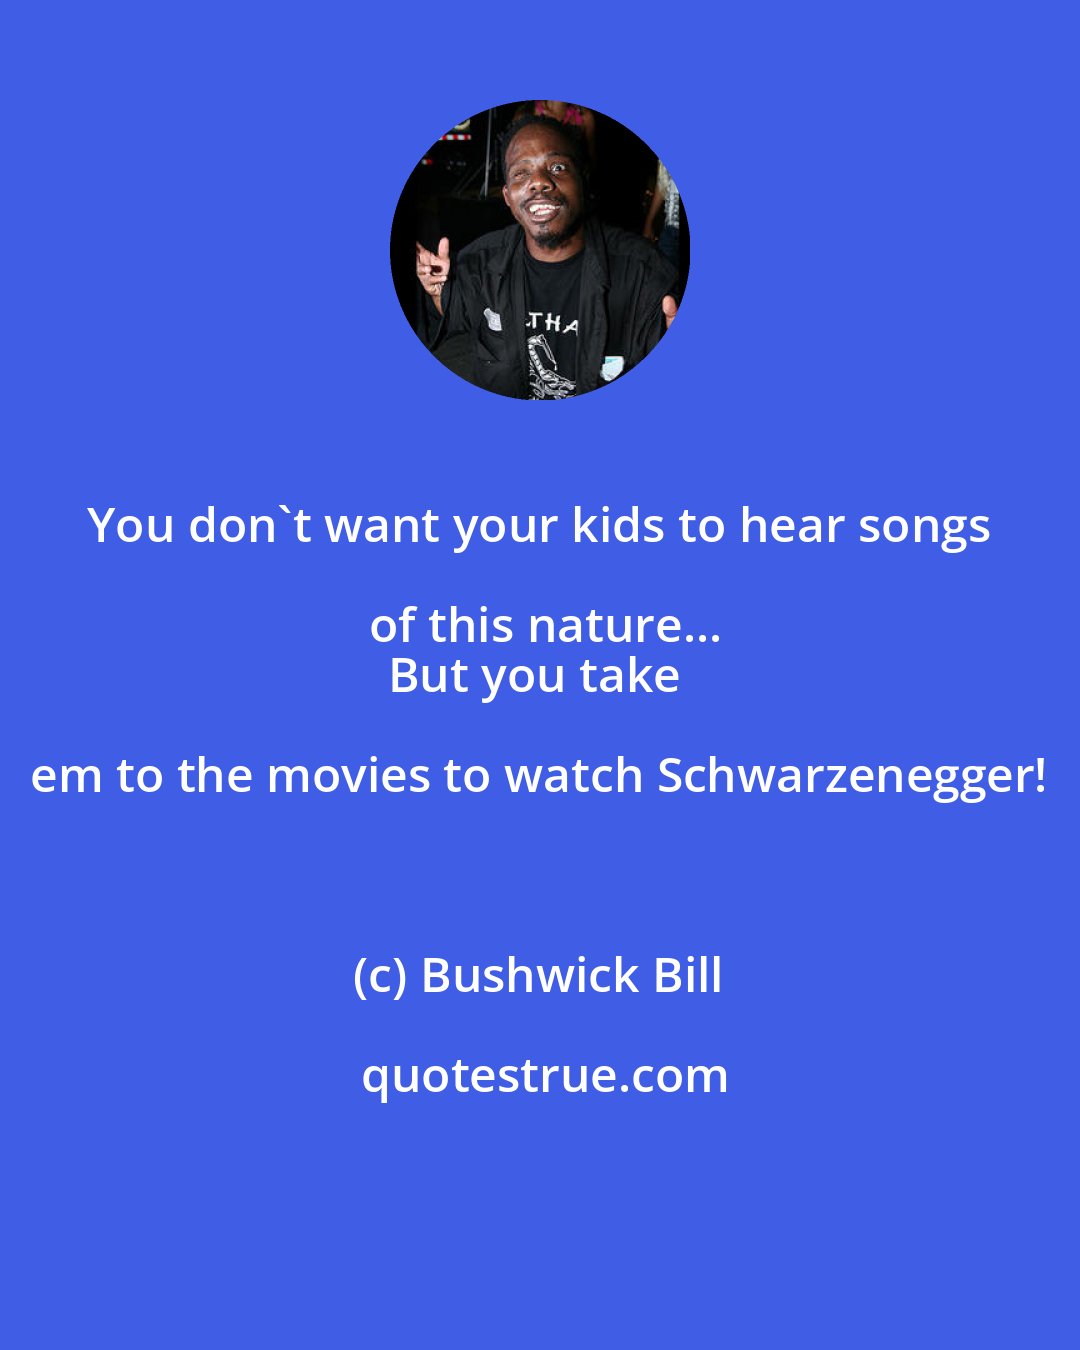 Bushwick Bill: You don't want your kids to hear songs of this nature...
But you take em to the movies to watch Schwarzenegger!